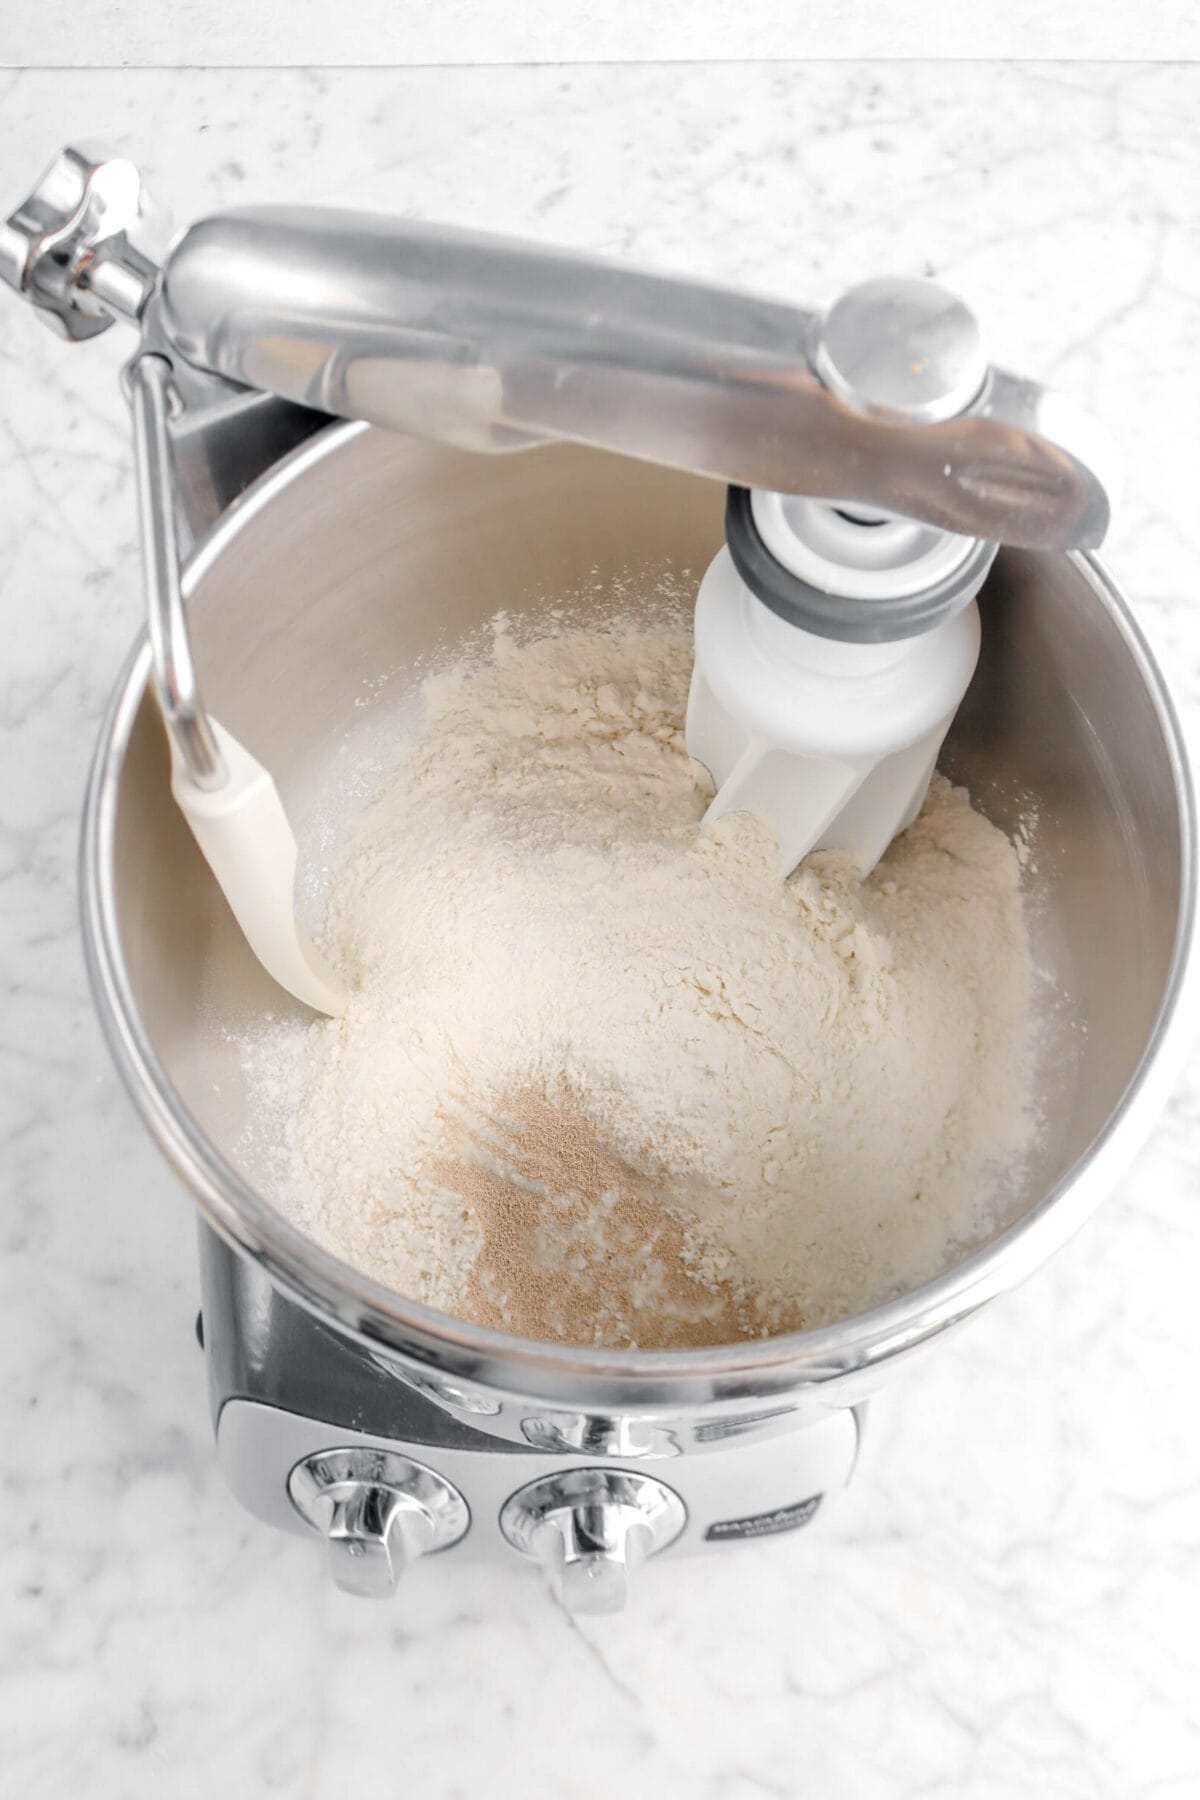 flour and yeast in mixer